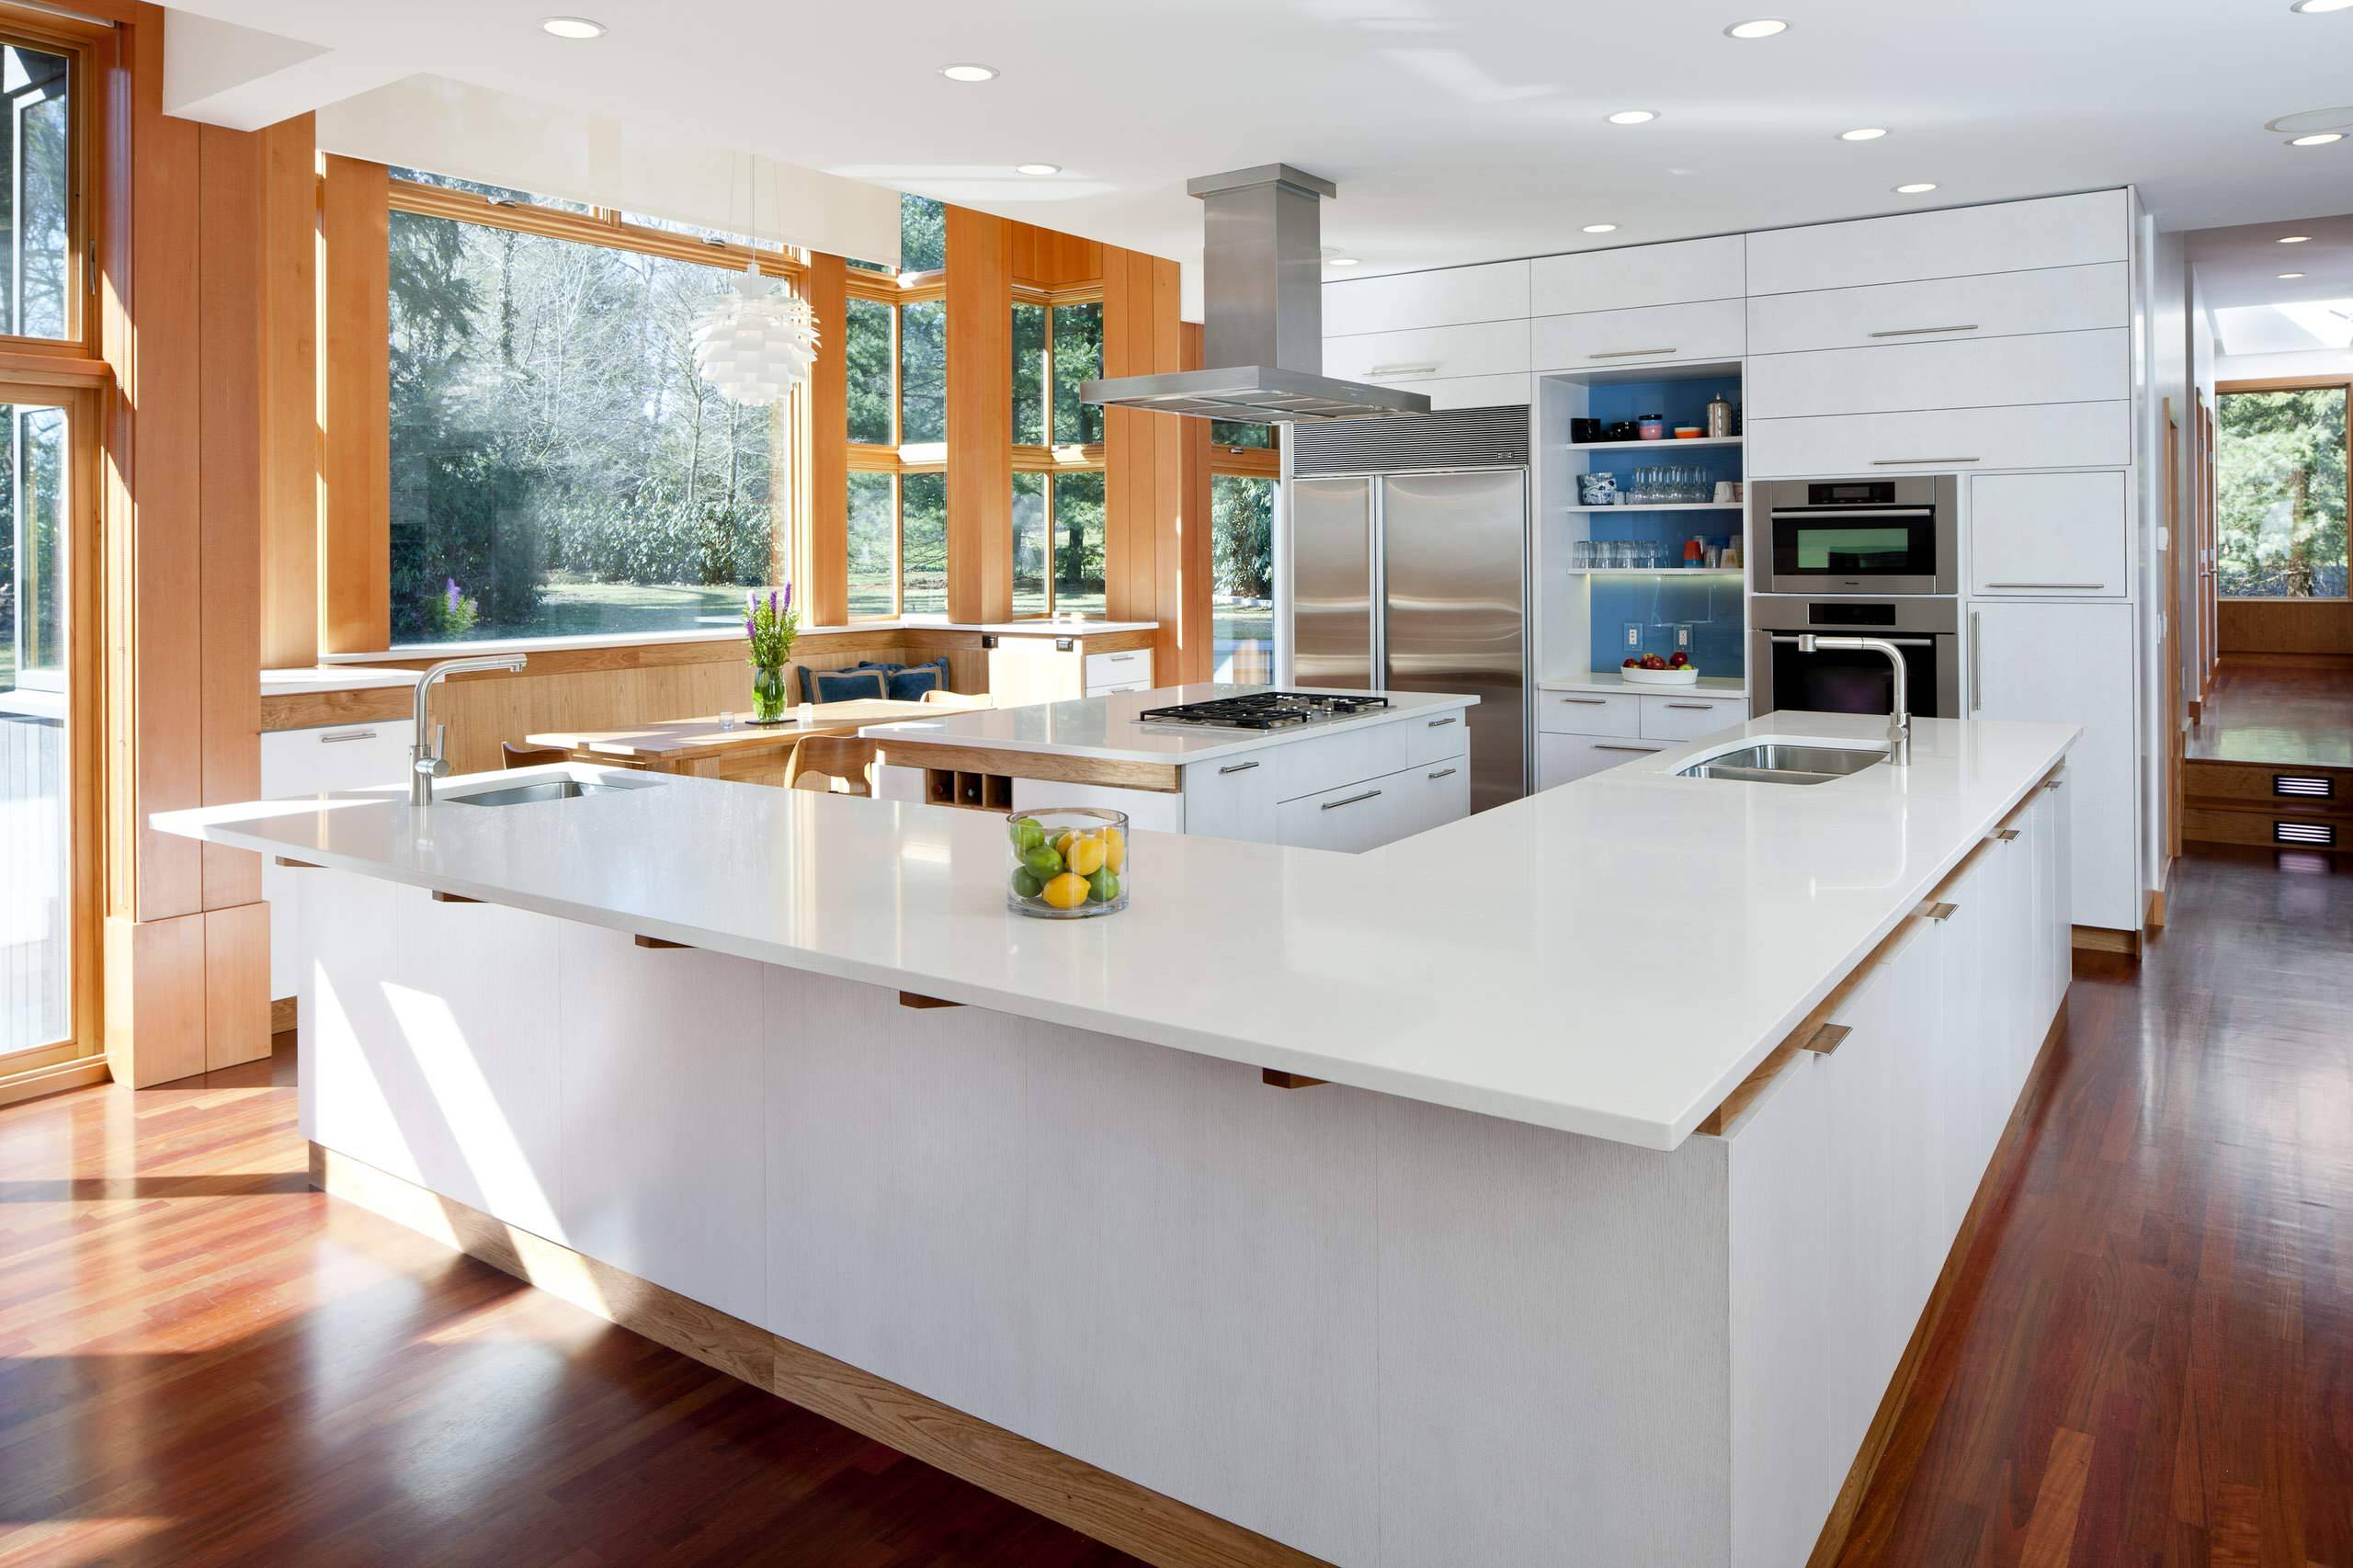 Sleek finishes and functionality (from Houzz)